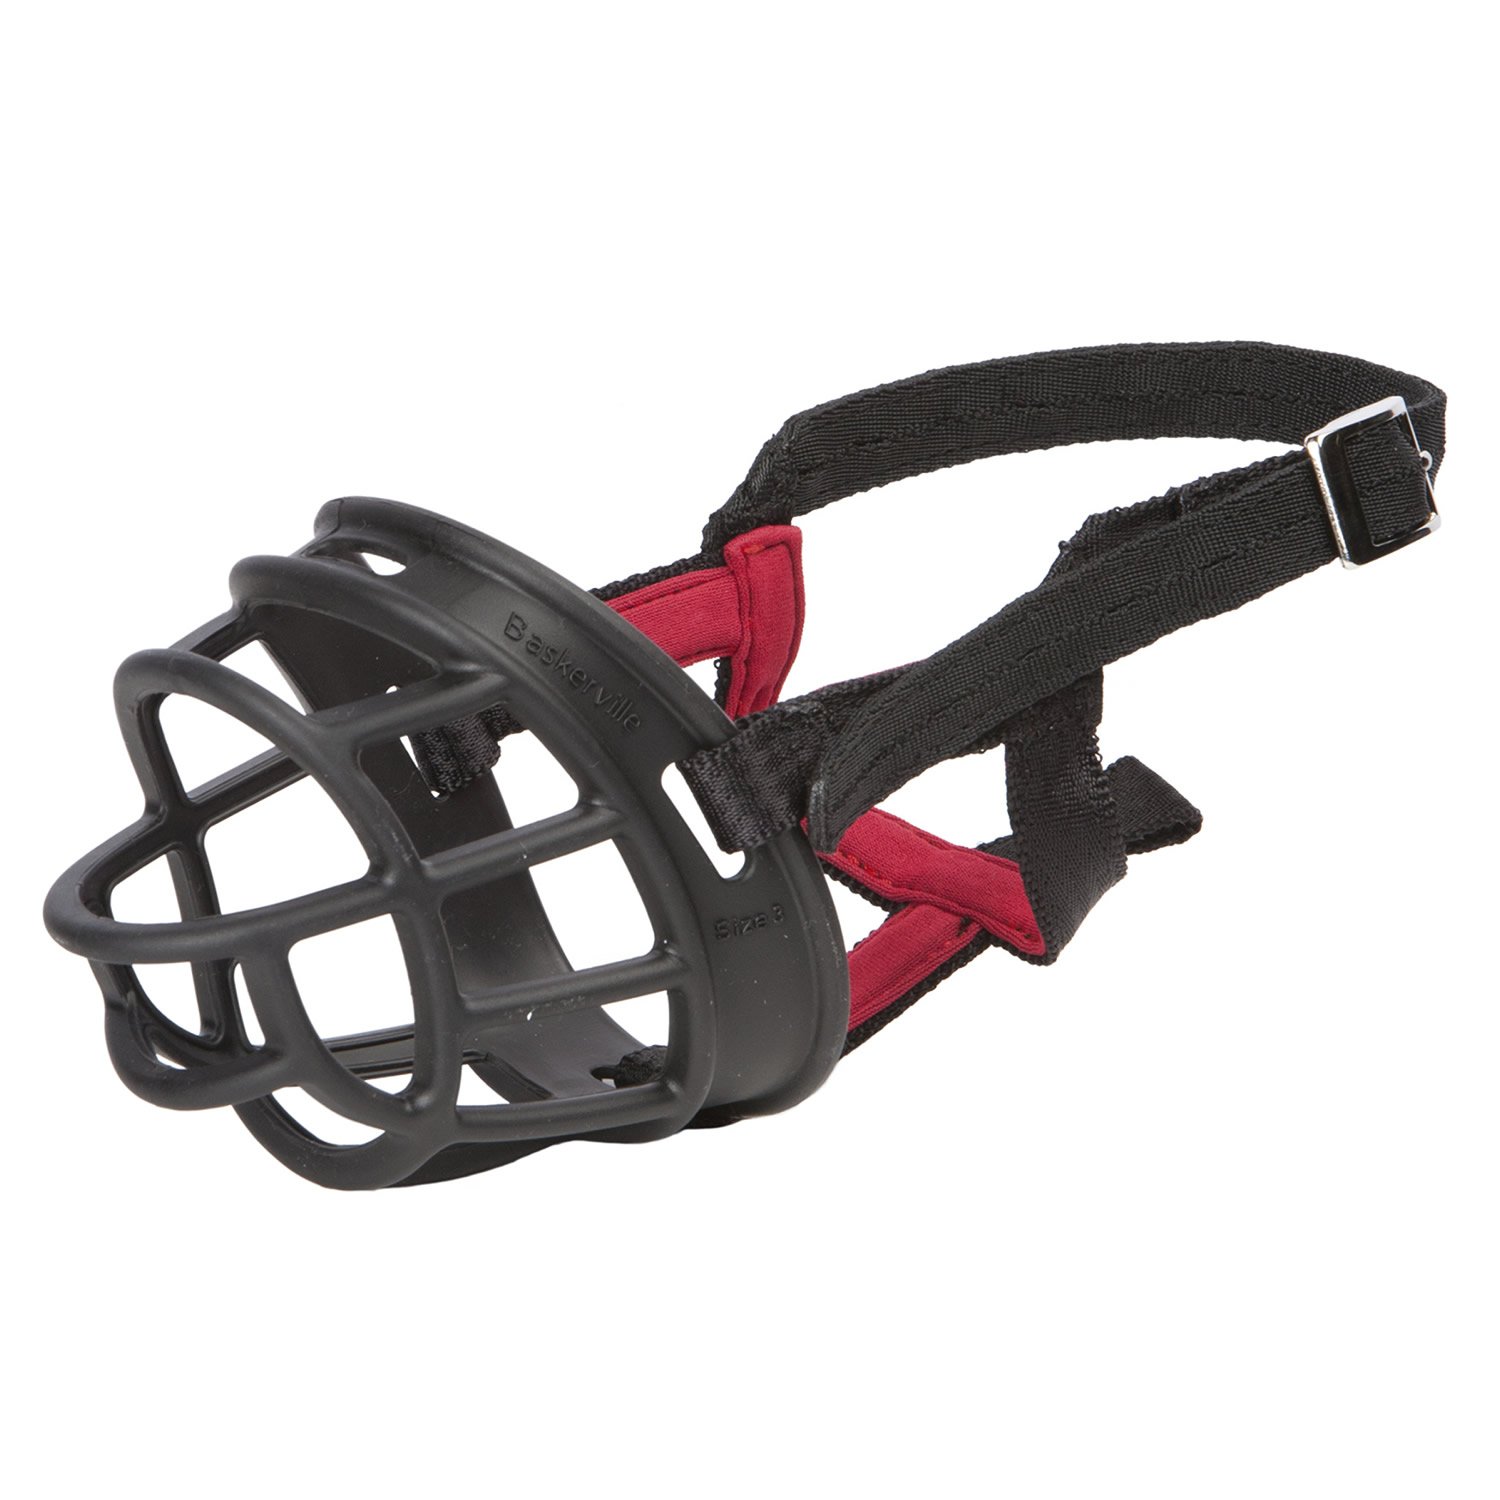 Petlife Baskerville Extra Extra Large Size 6 Muzzle For Dogs